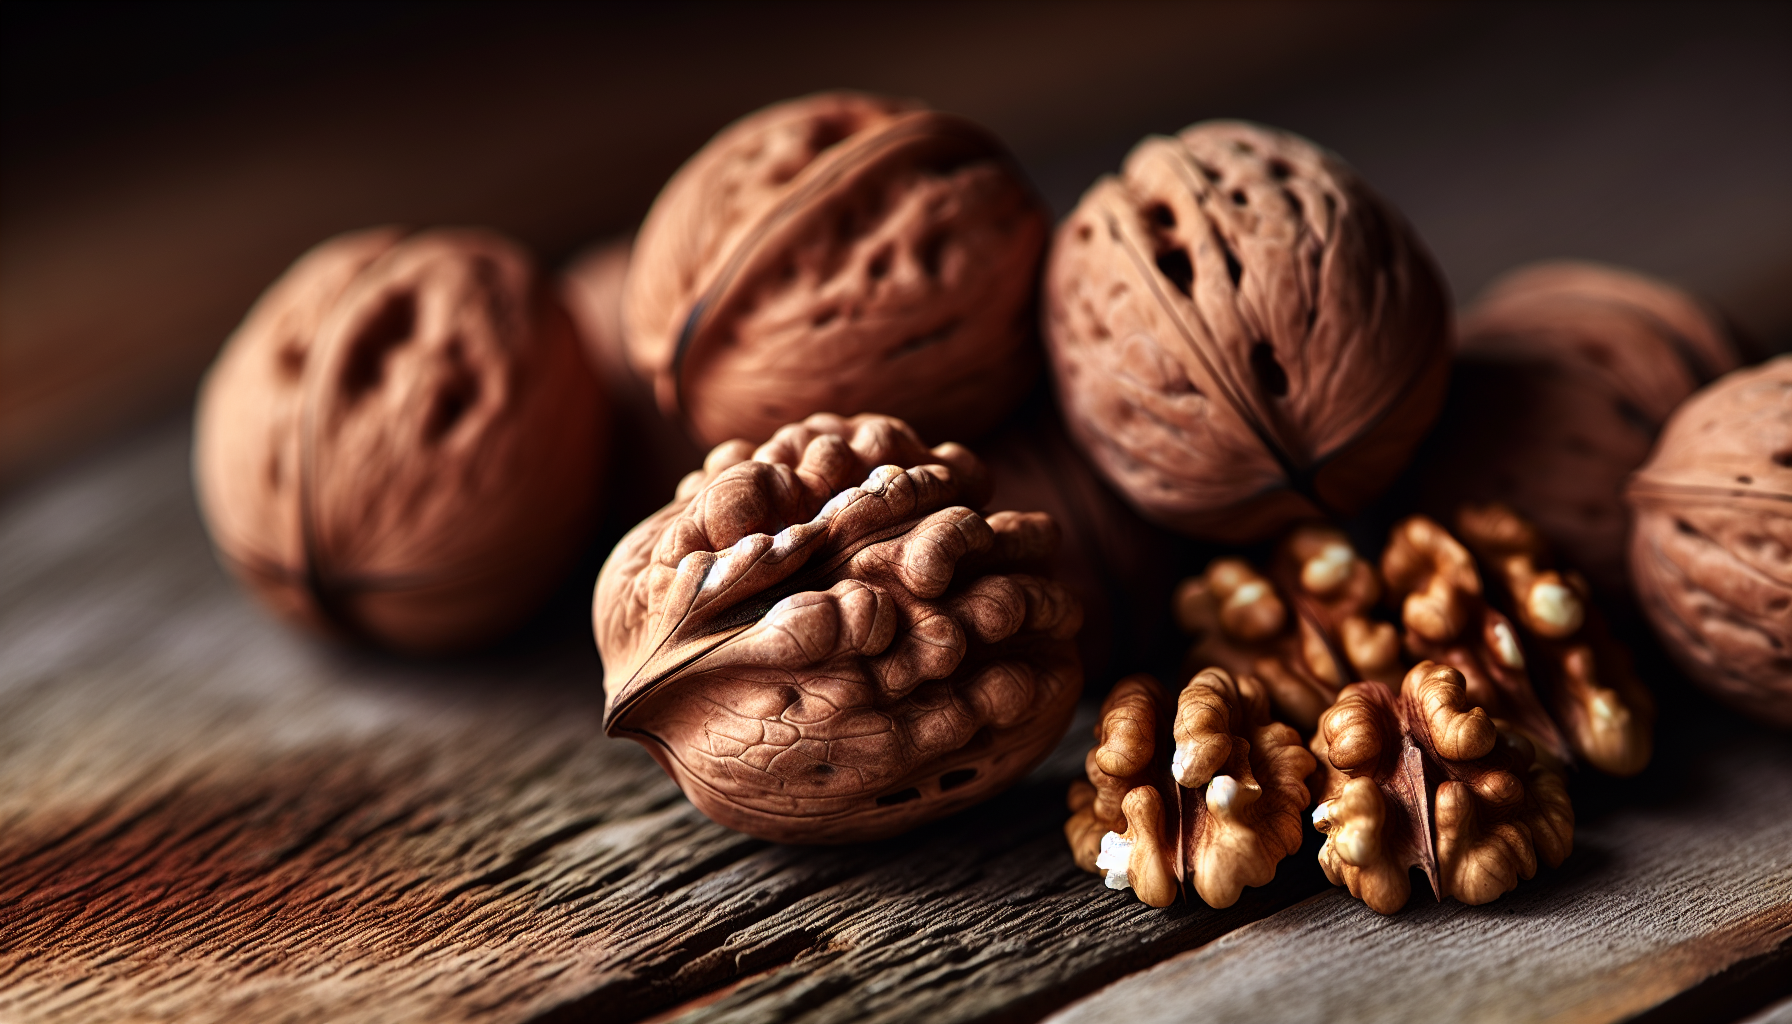 A pile of omega-3 rich walnuts